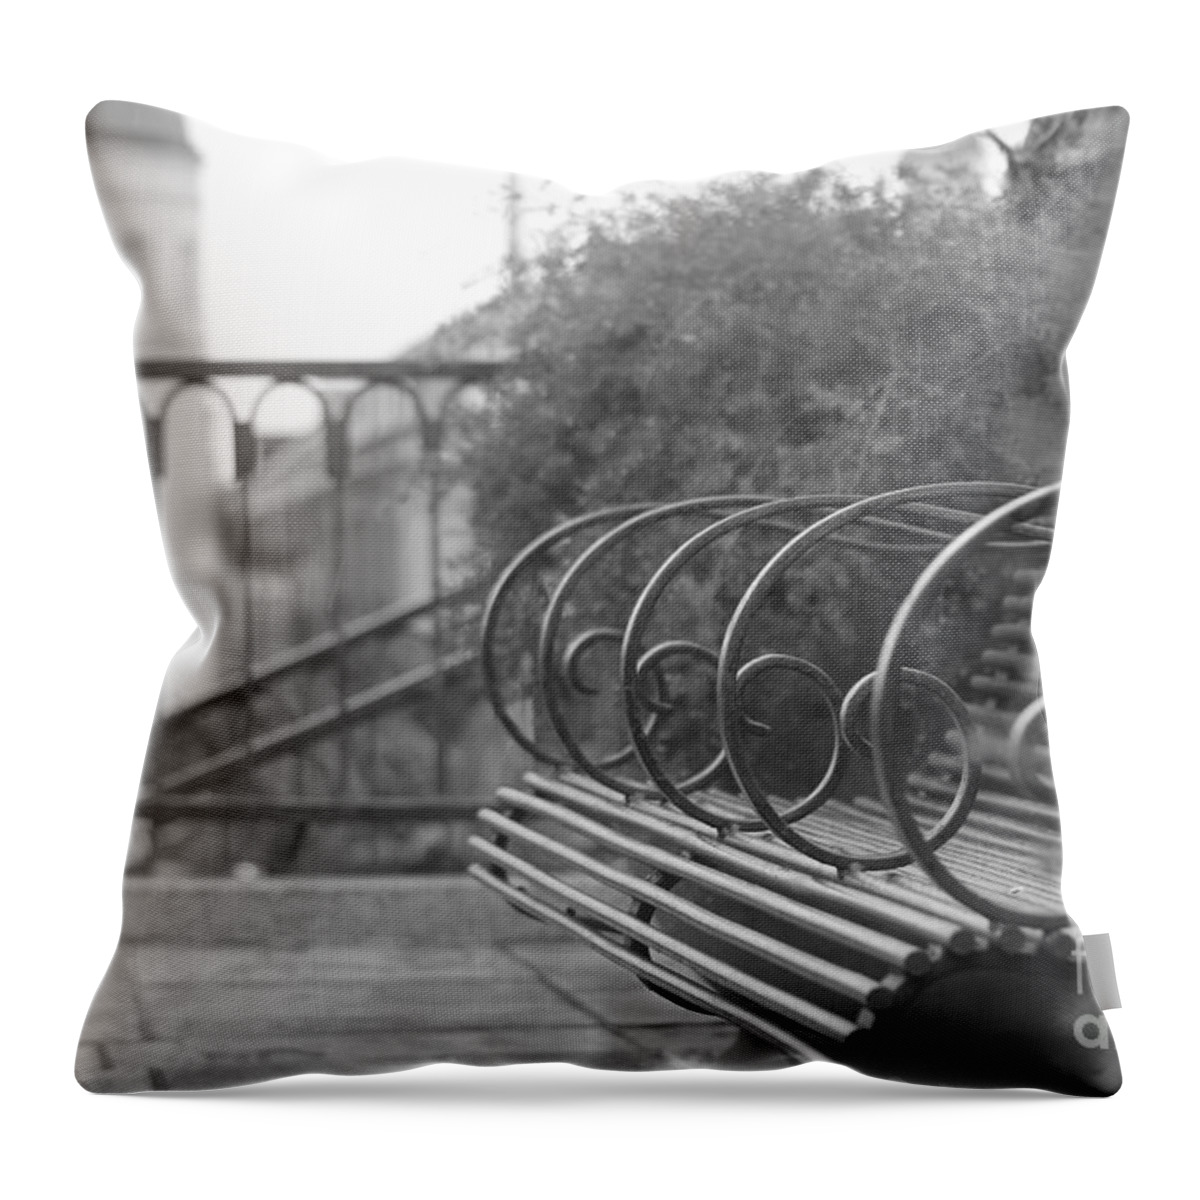 Park Bench Throw Pillow featuring the photograph Park bench by Michelle Powell